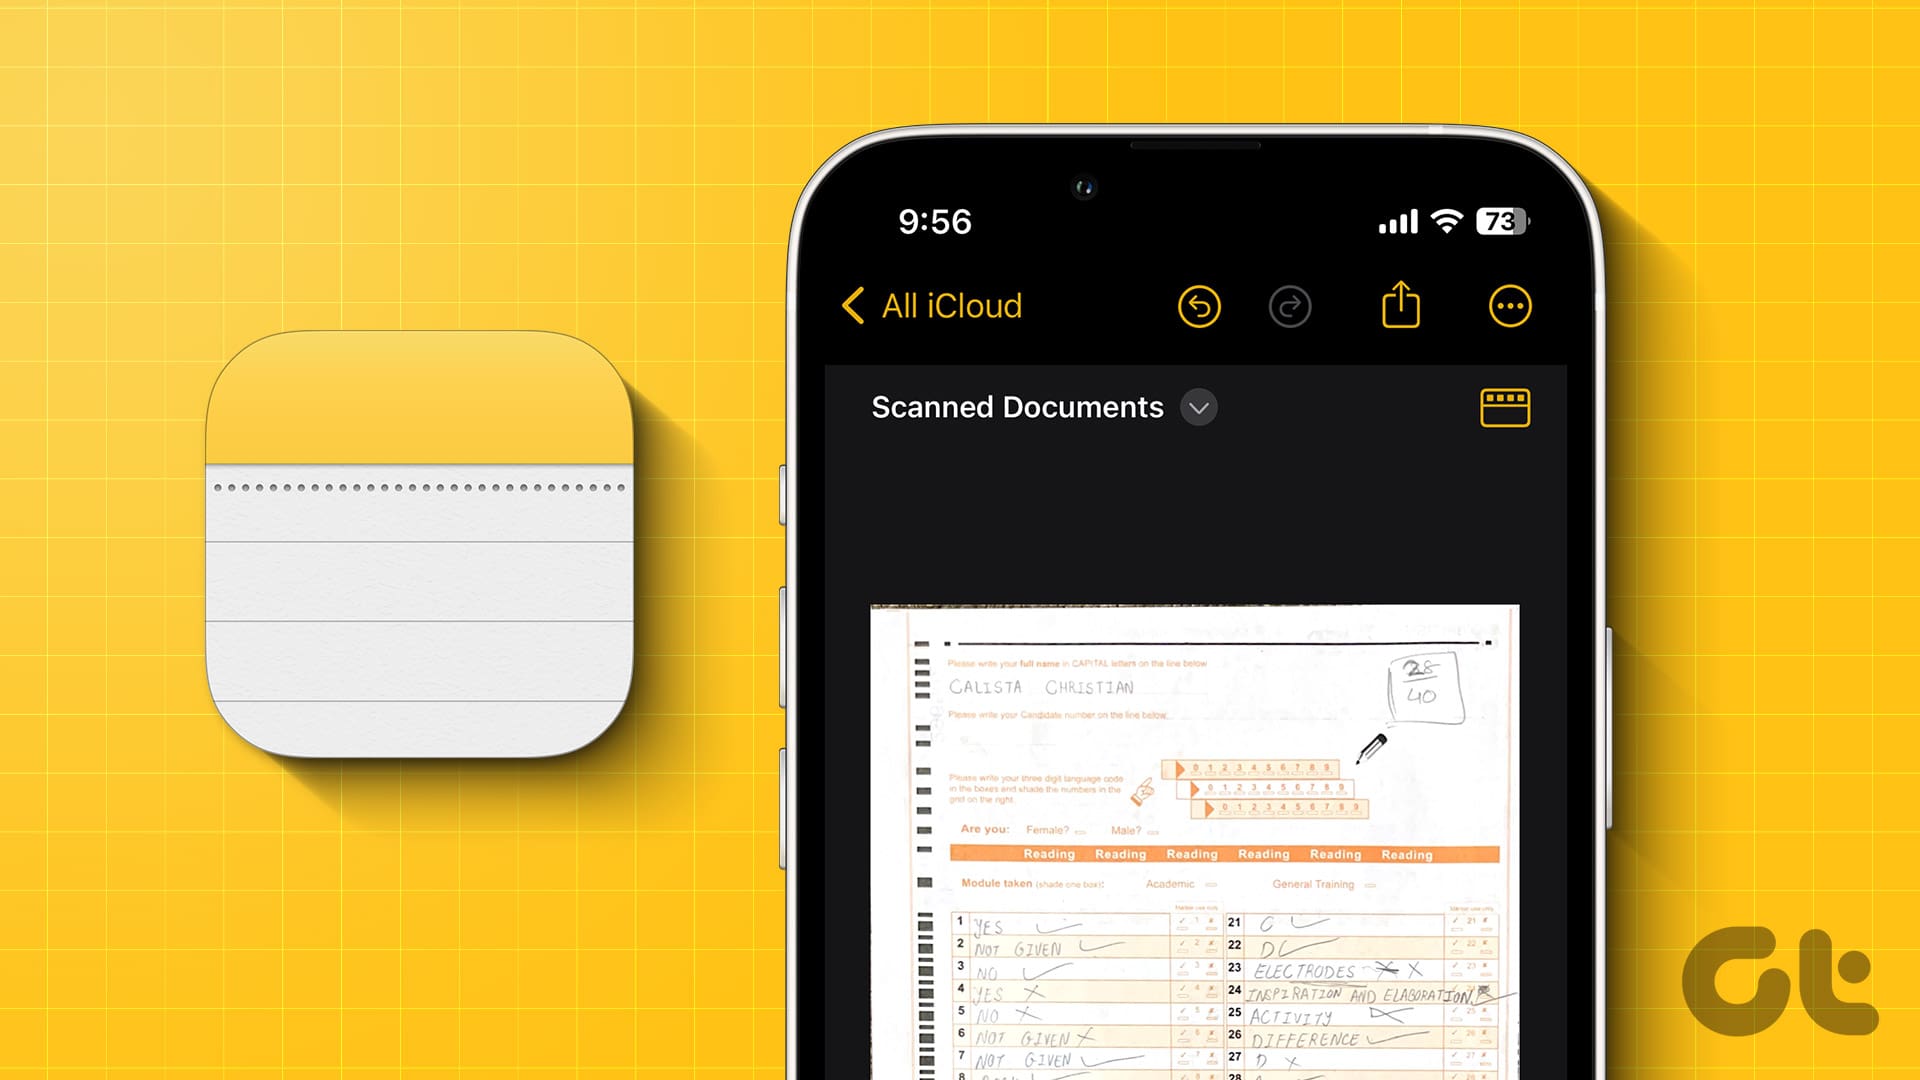 Send scanned documents iPhone Notes